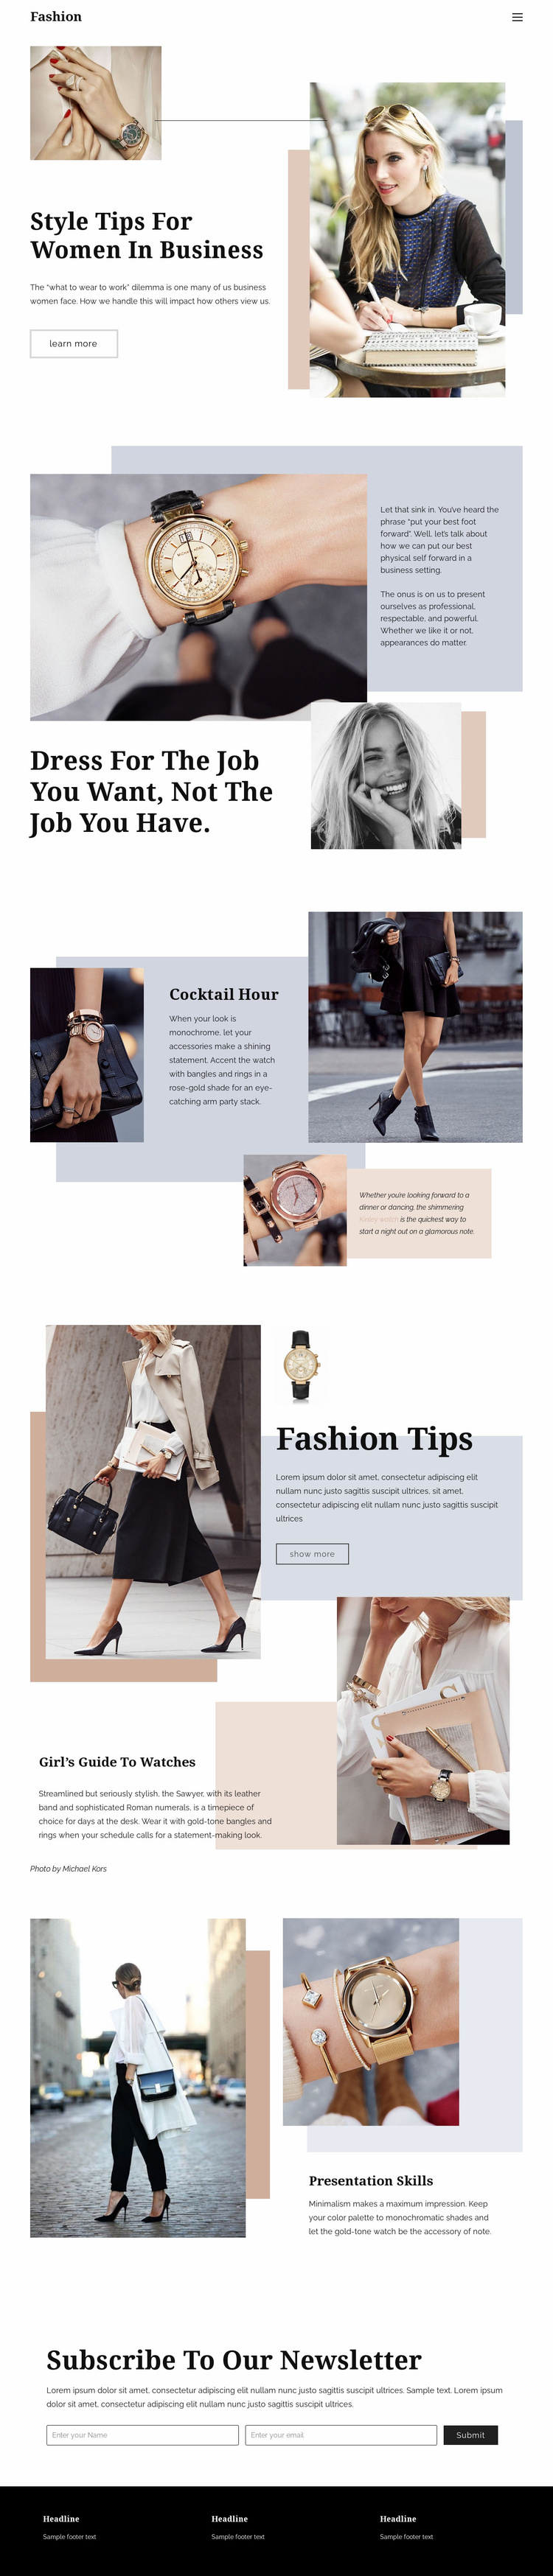 Fashion tips Website Template